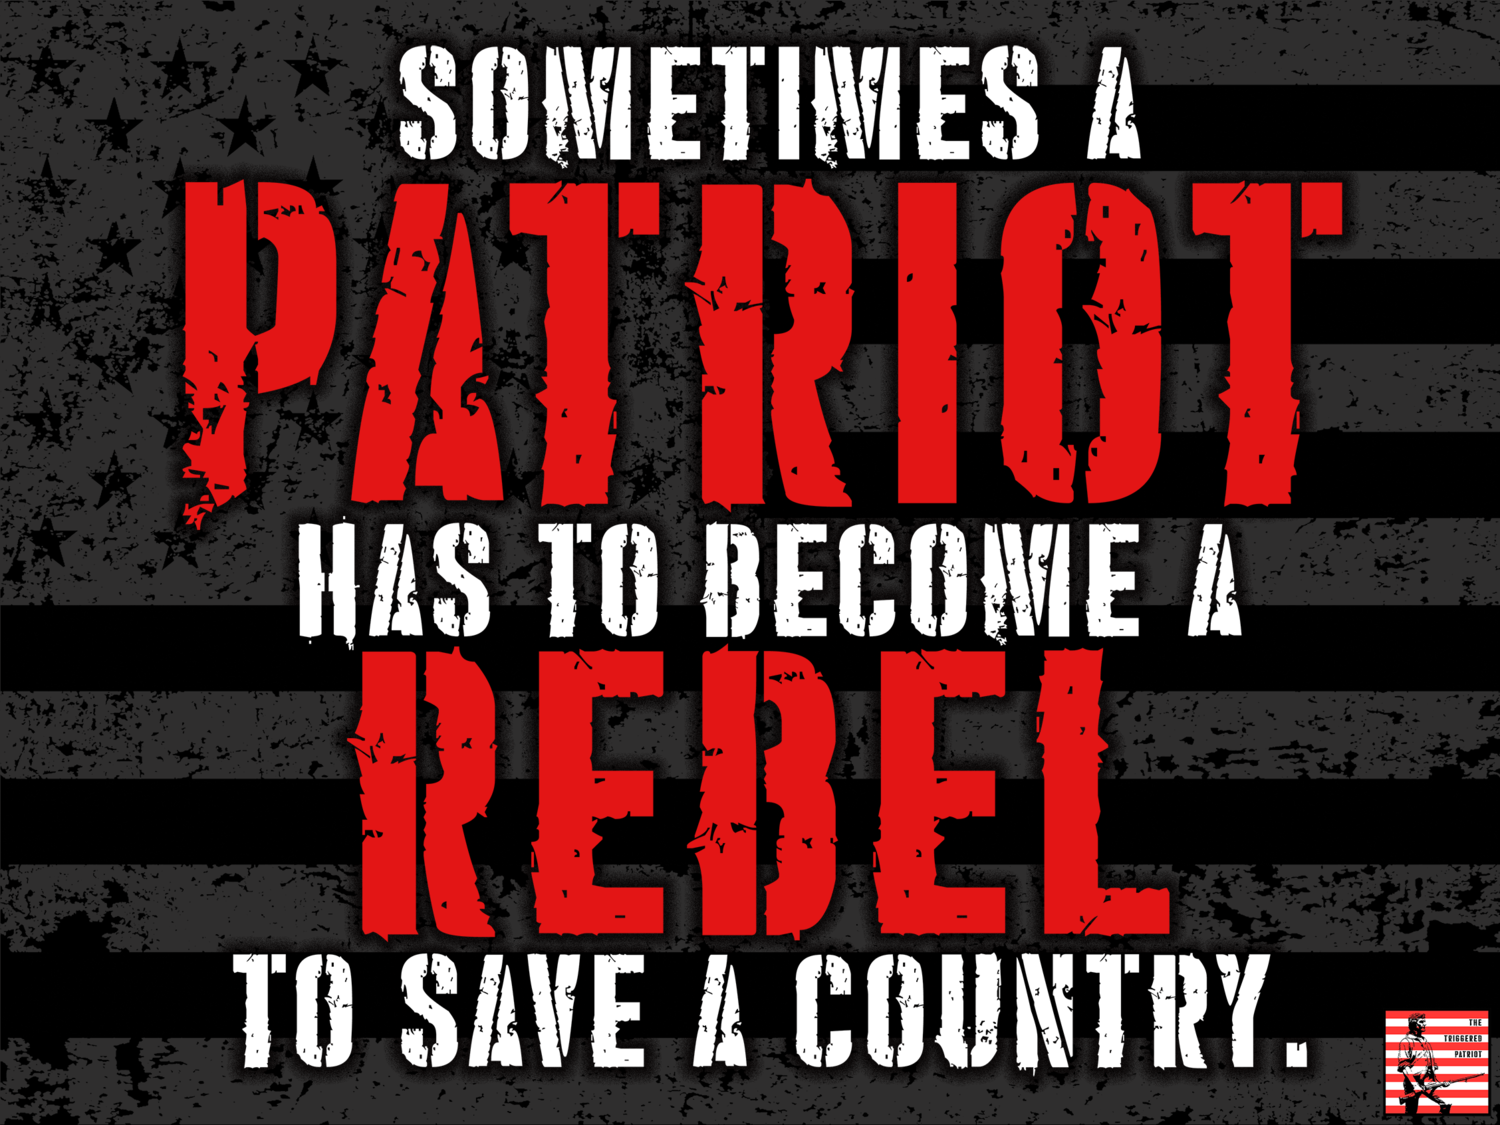 Patriot has to become a Rebel